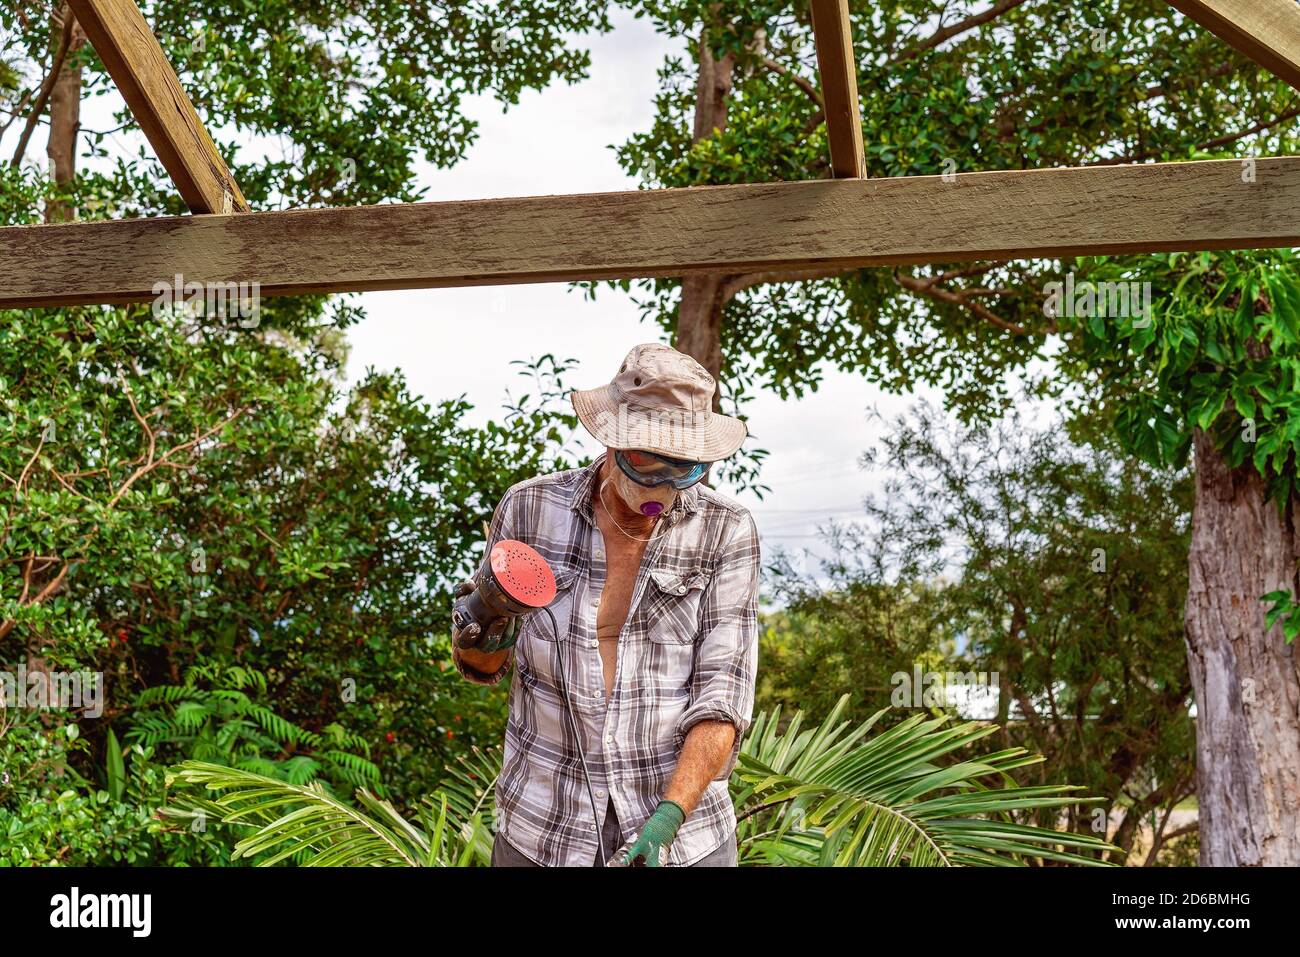 Townsville, Queensland, Australia - June 2020: Man standing sanding and repairing timber roof rafters of residential house Stock Photo